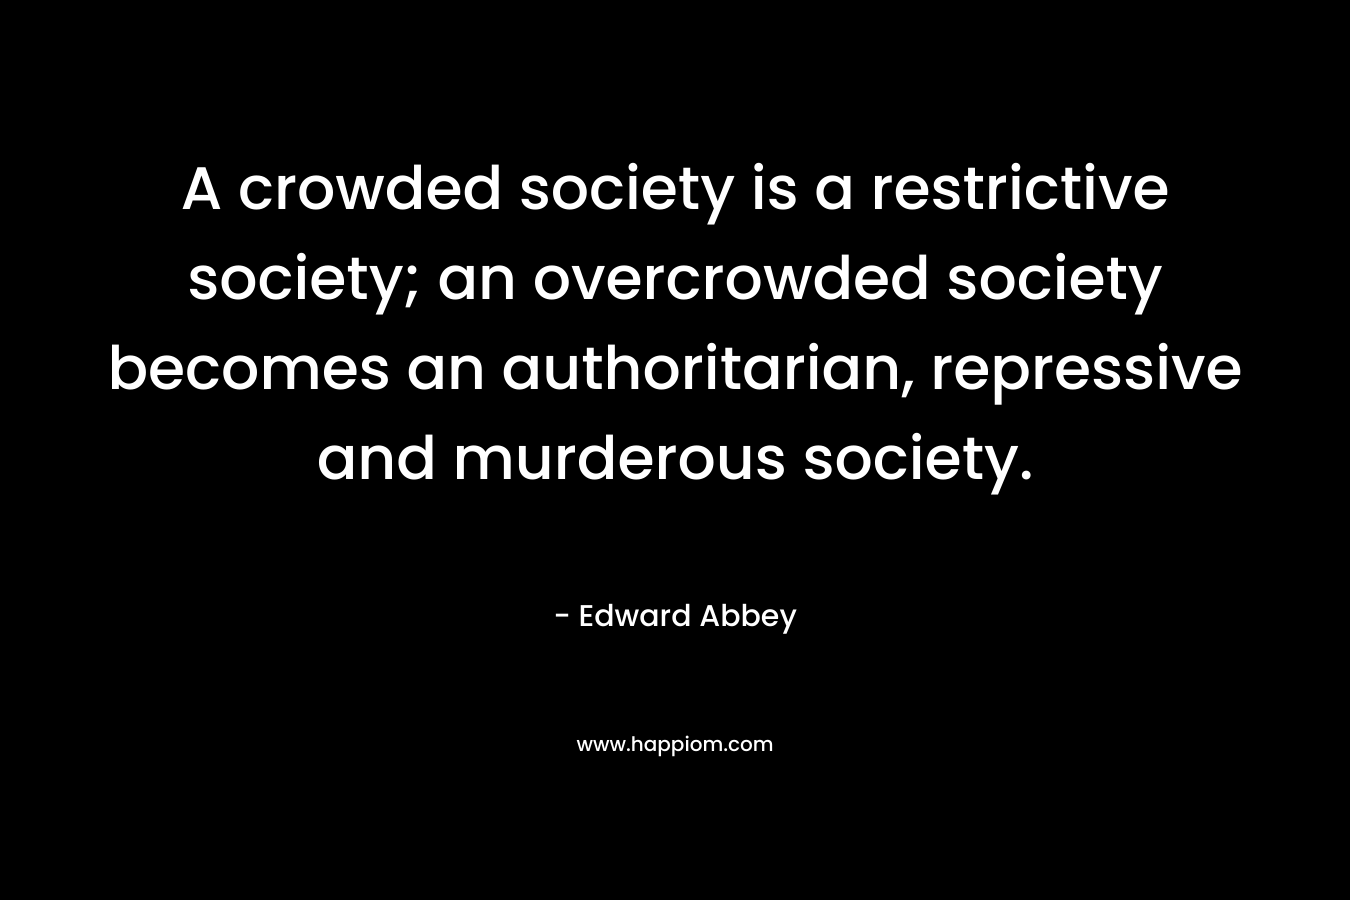 A crowded society is a restrictive society; an overcrowded society becomes an authoritarian, repressive and murderous society.